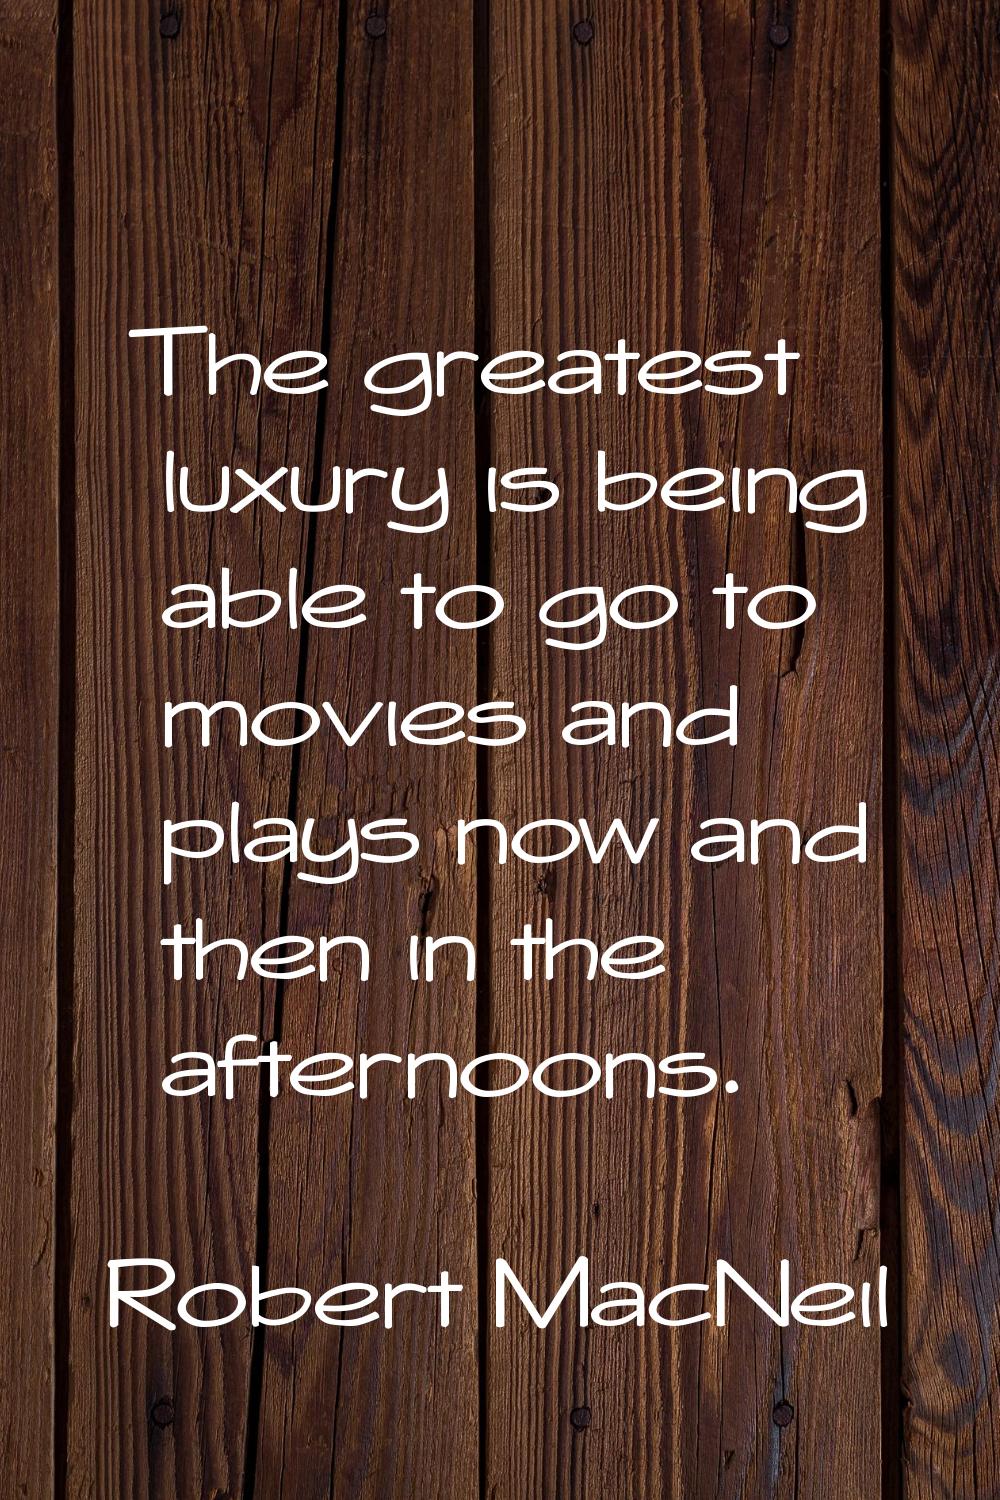 The greatest luxury is being able to go to movies and plays now and then in the afternoons.